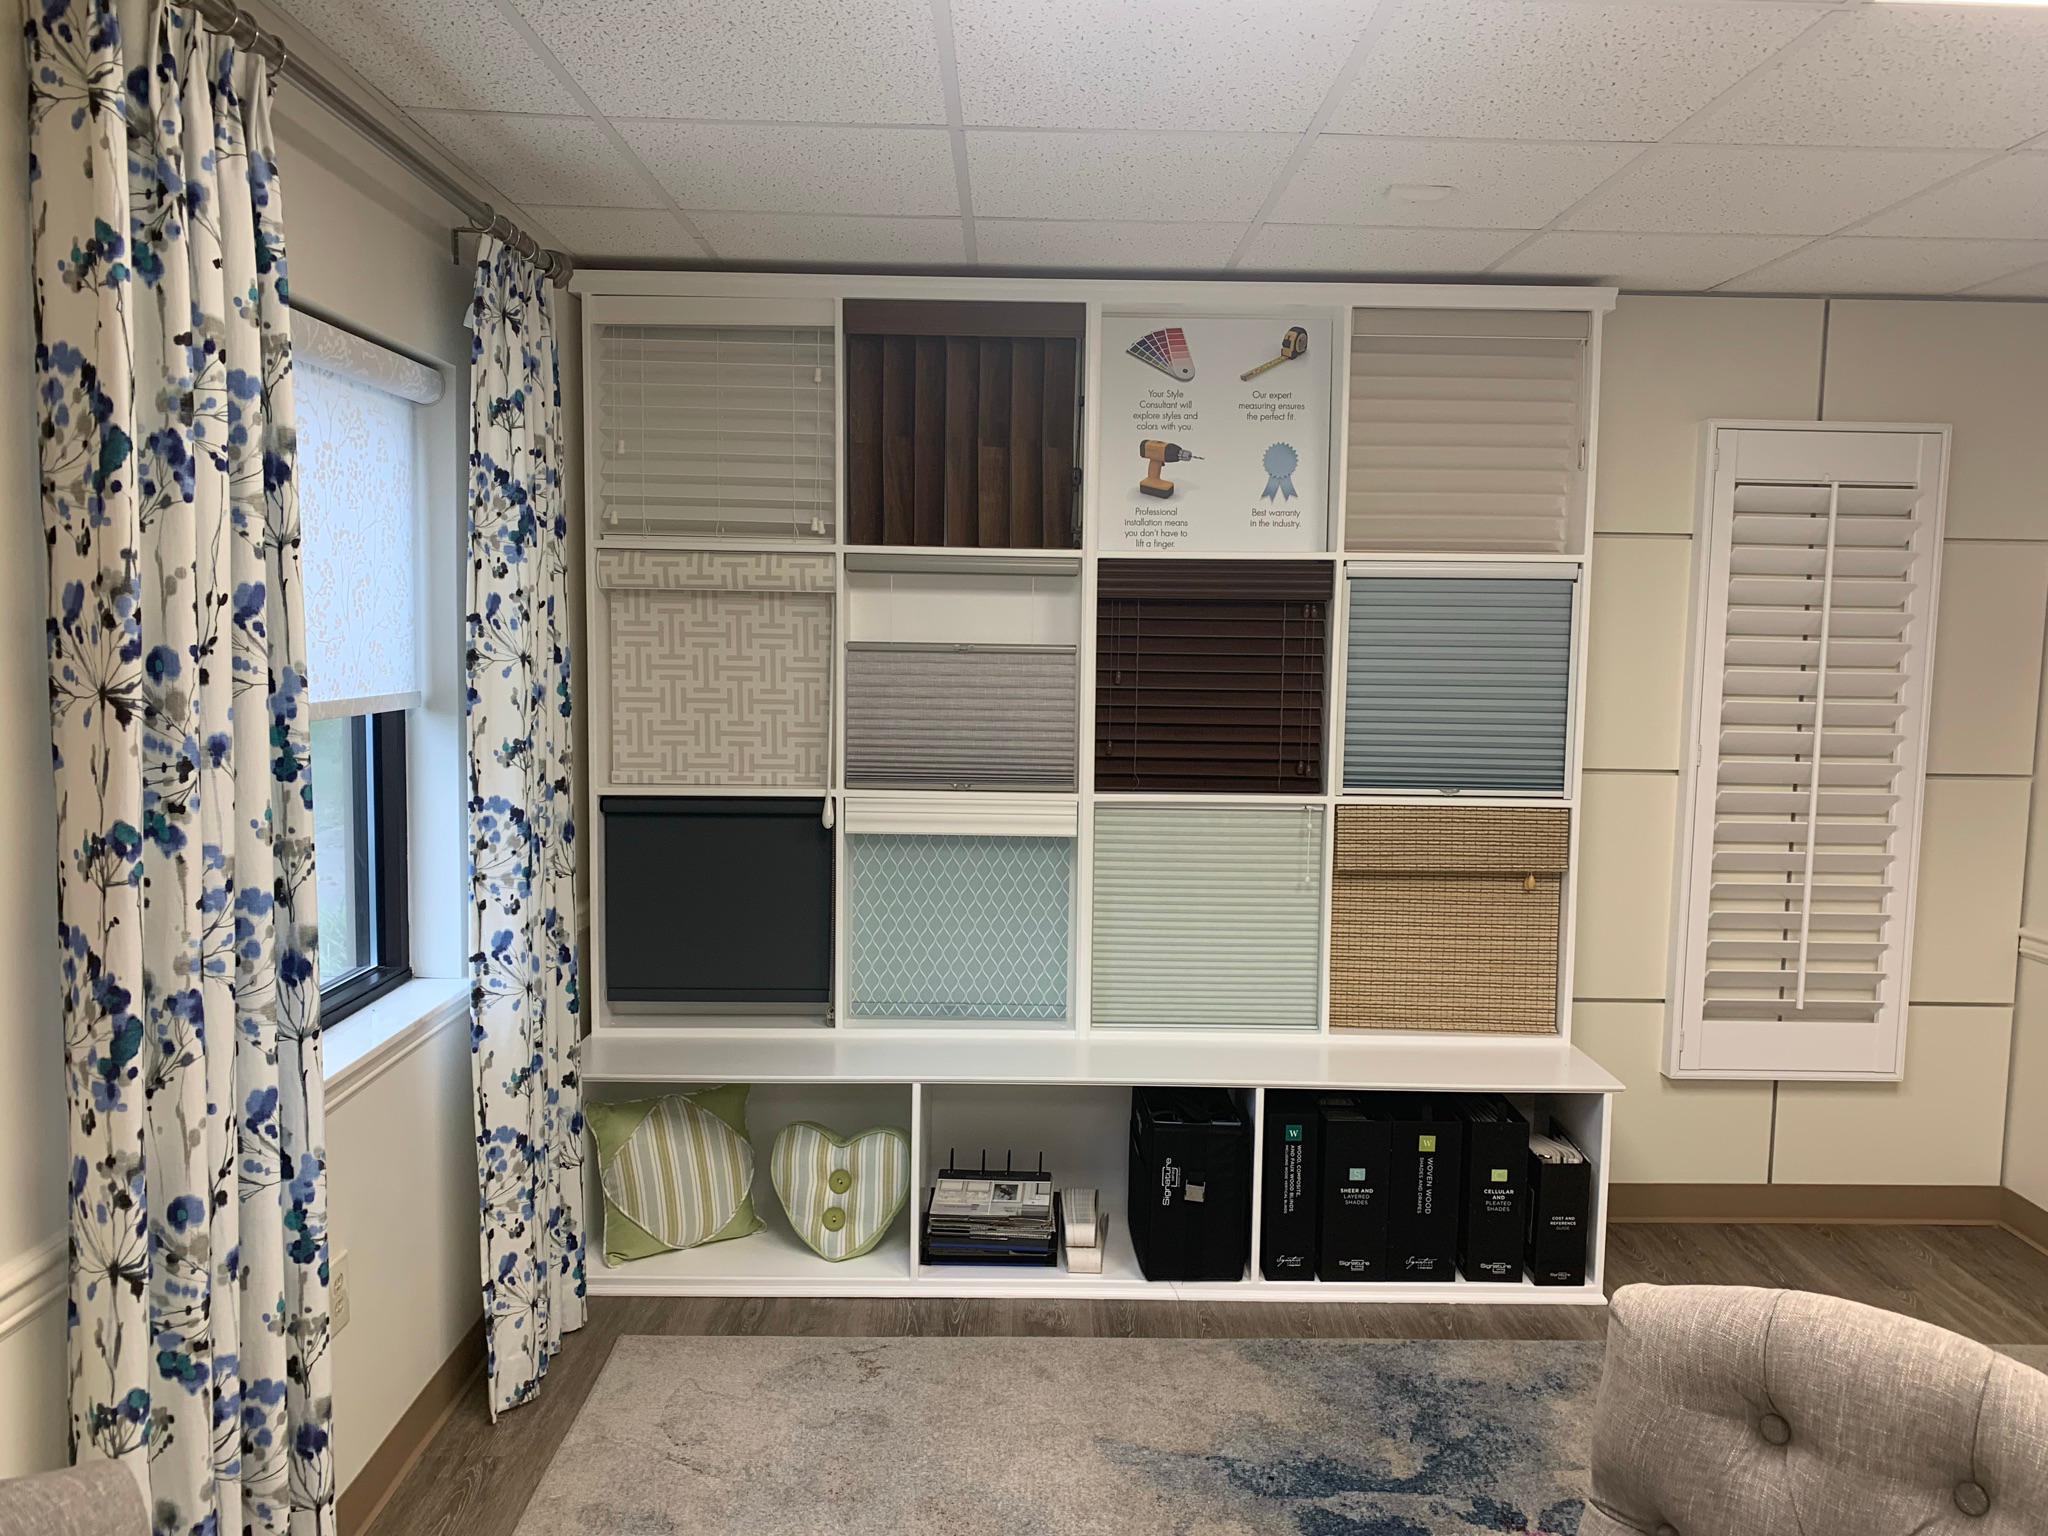 Plantation Shutters, blinds, motorized shades, woven woods and more Budget Blinds of Knoxville & Maryville Knoxville (865)588-3377